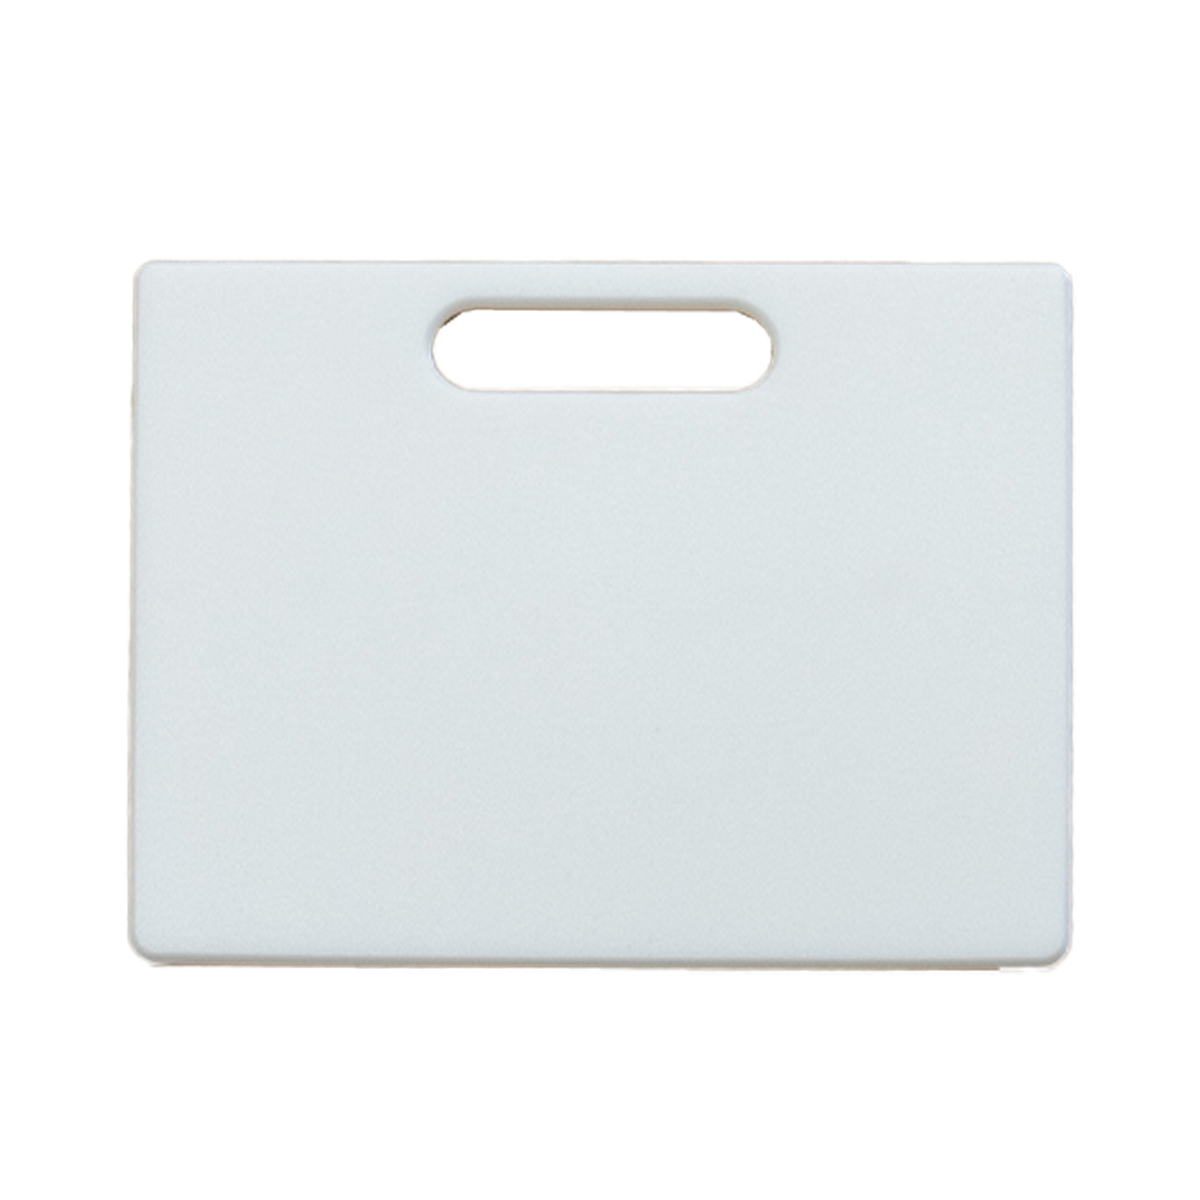 Featuring the Prospector 103 Divider cutting board, divider, organize, organizer, prospector, veggies manufactured by Canyon shown here from one angle.